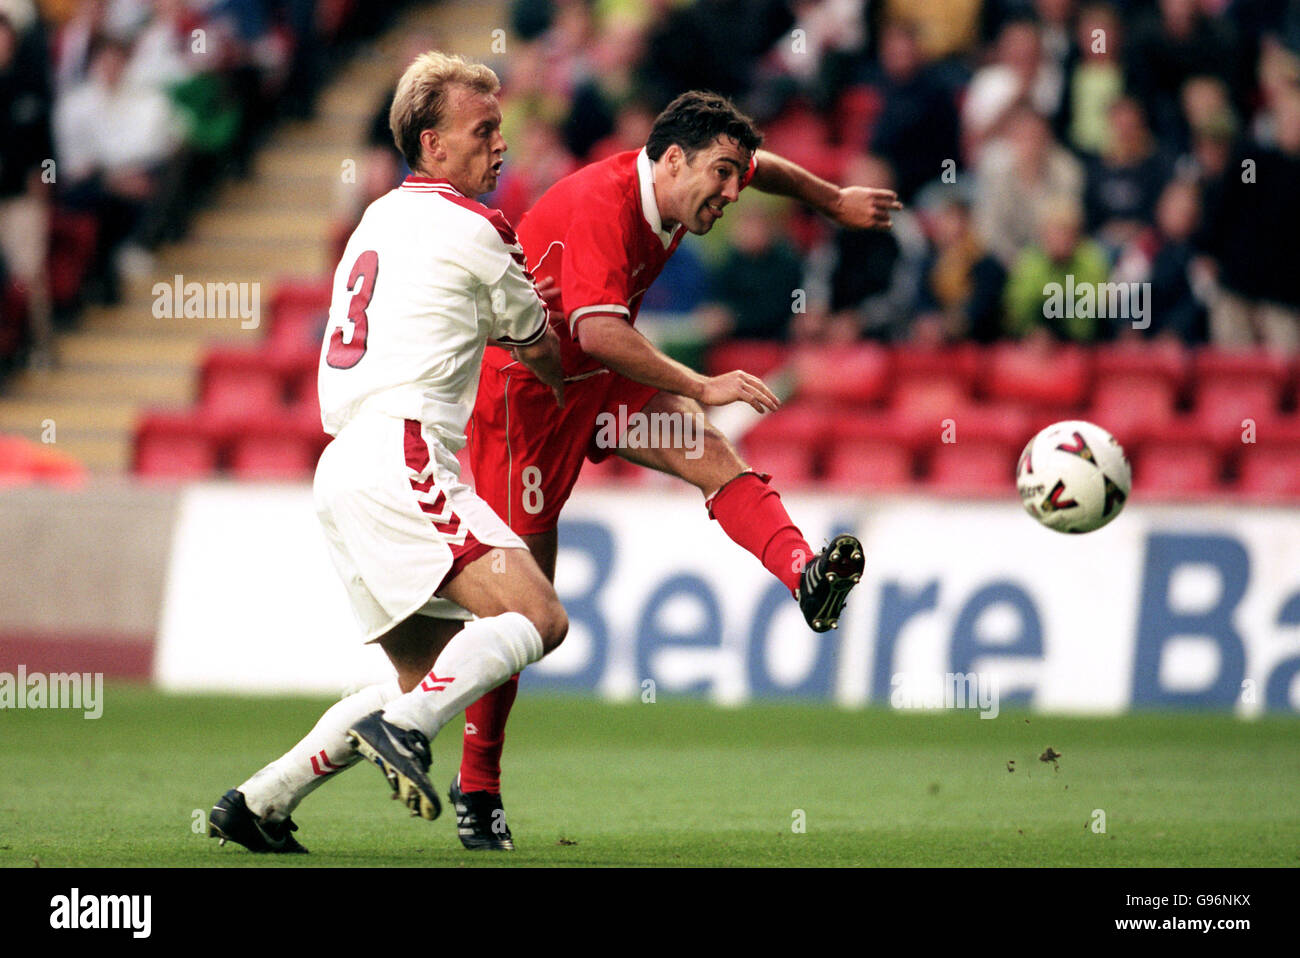 Soccer - Euro 2000 Qualifier - Group One - Wales v Denmark. Wales's Dean Saunders fires a shot inches wide as Denmark's Rene Henriksen challenges Stock Photo